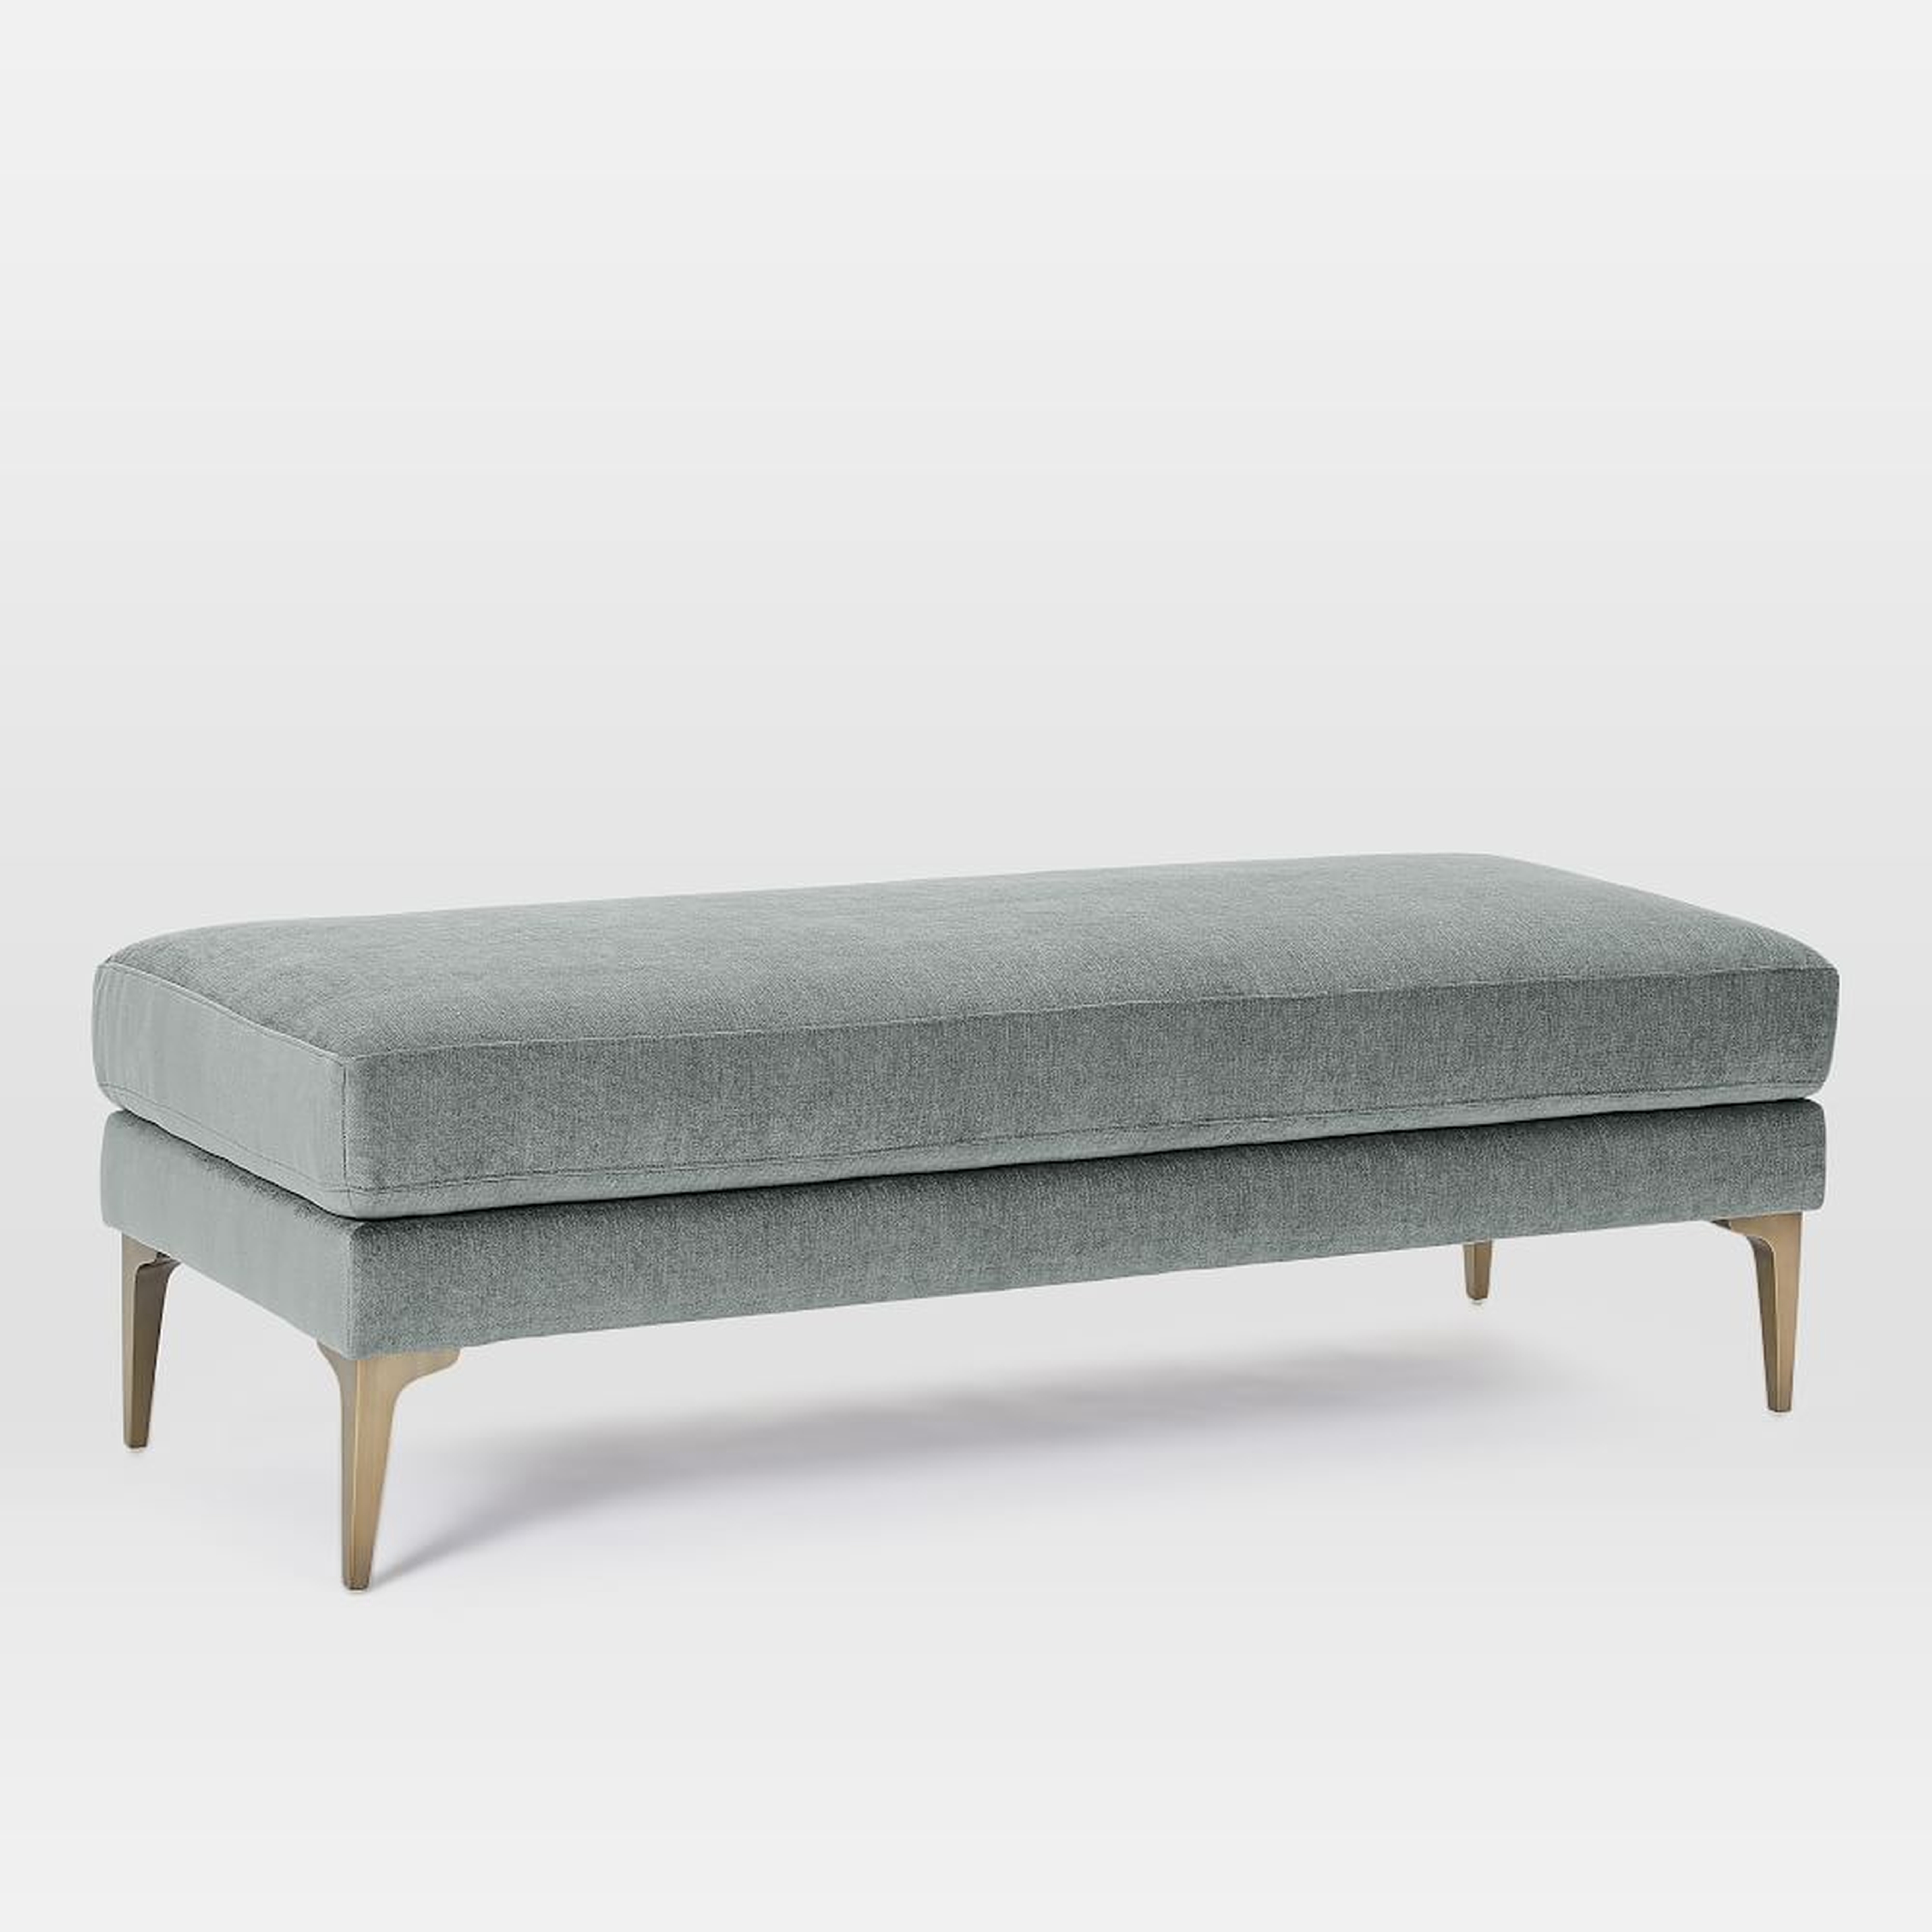 Andes Bench, Poly, Distressed Velvet, Mineral Gray, Blackened Brass - West Elm